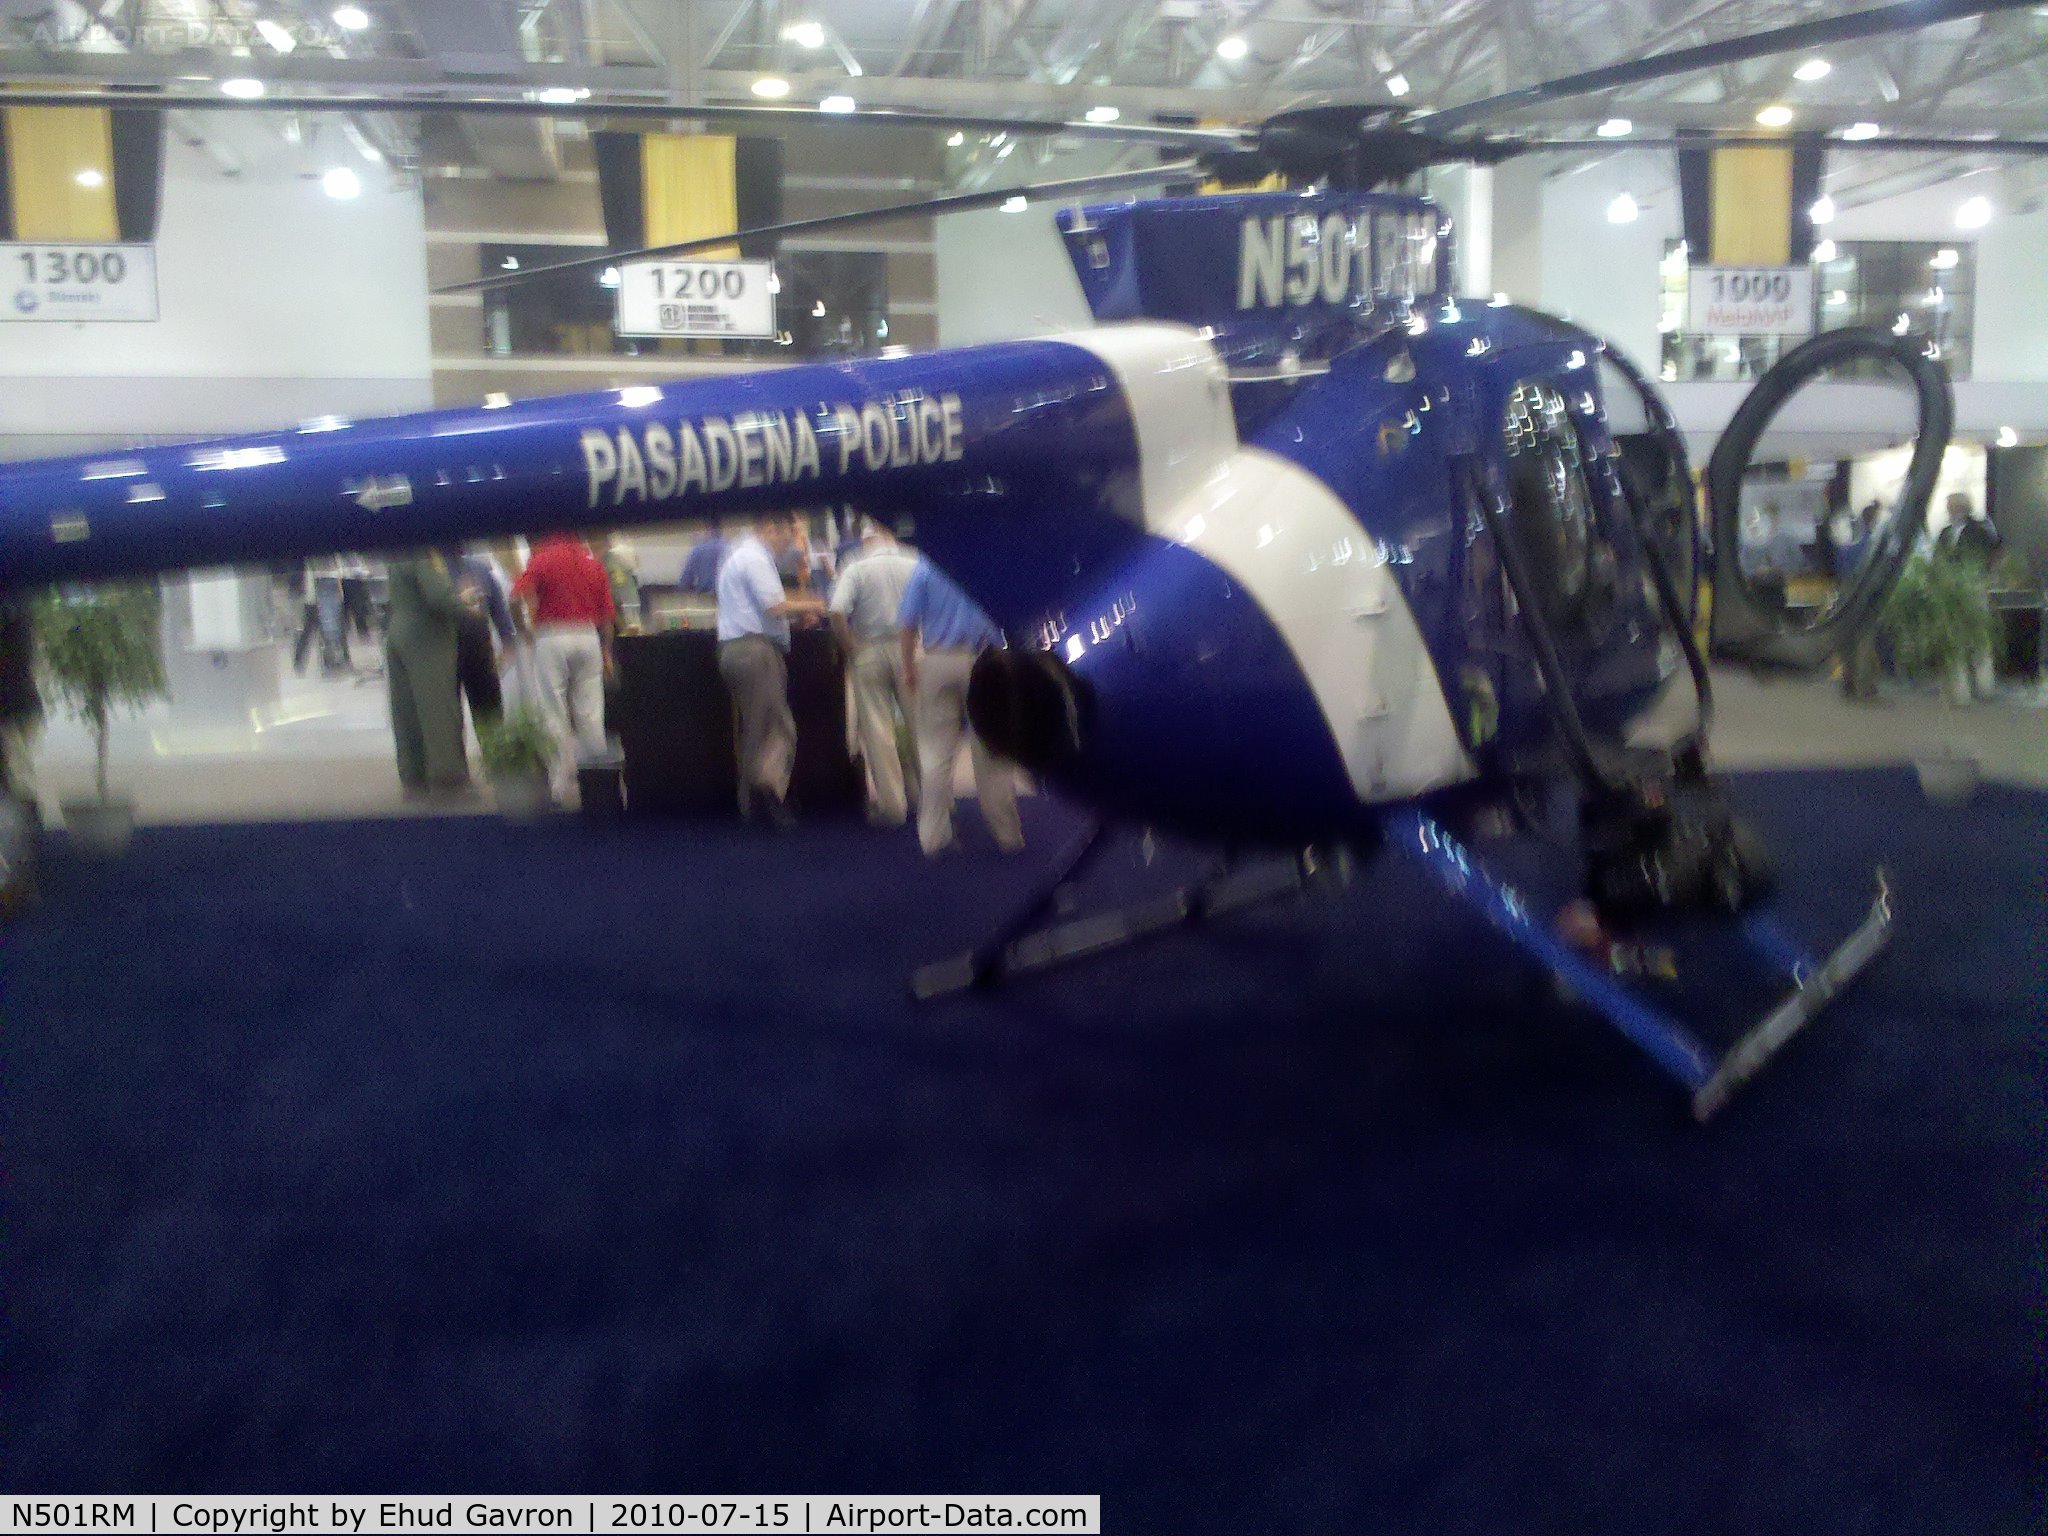 N501RM, 2009 MD Helicopters 369E C/N 0598E, Pasadena Police helicopter on display at the Airborne Law Enforcement Assocation convention, Tucson Convention Center, Tucson AZ.